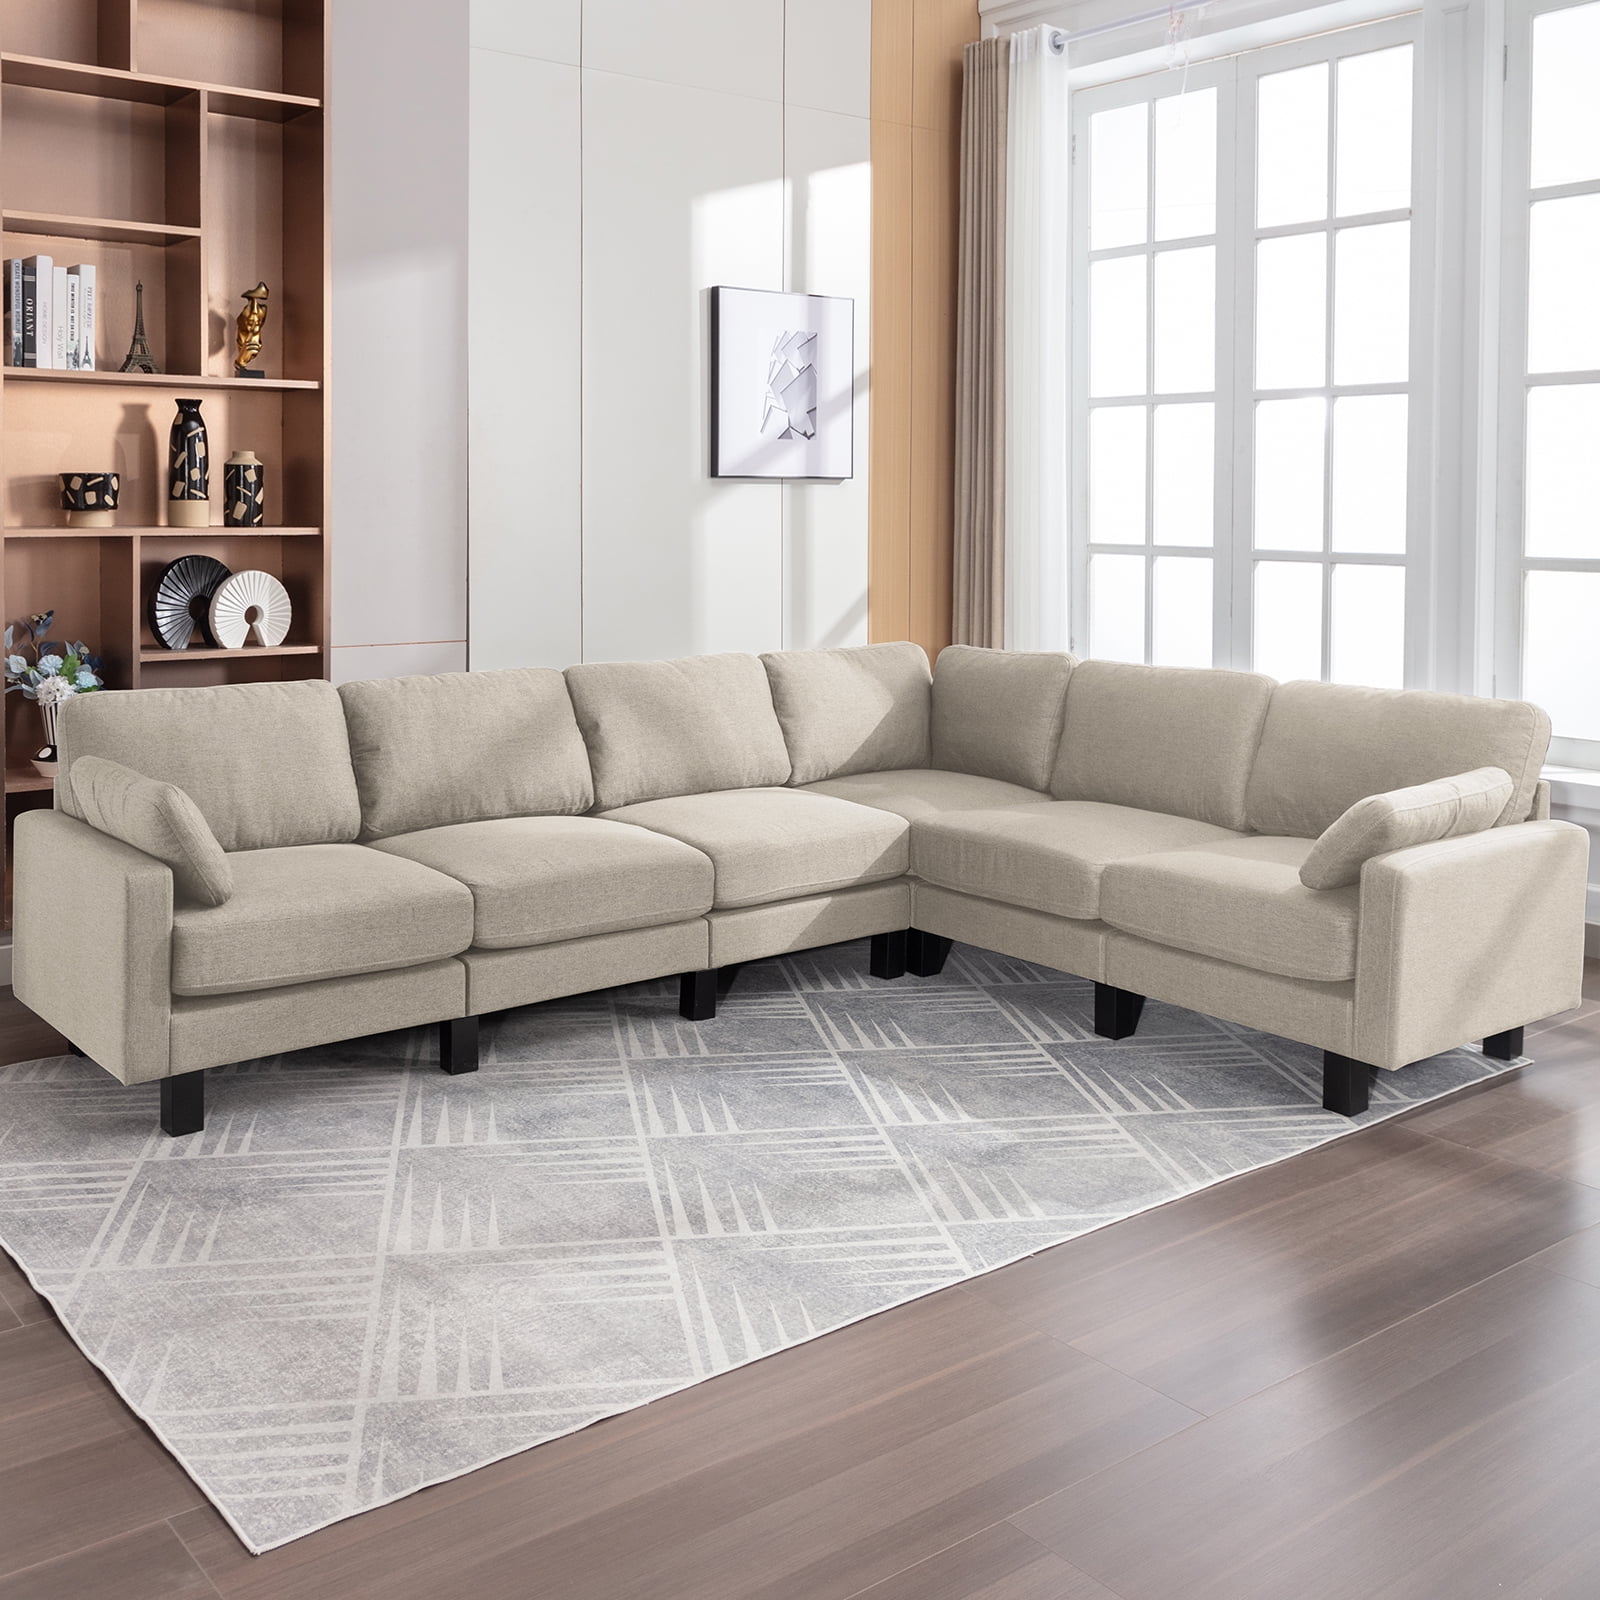 ijuicy Sectional Sofa with Linen Upholstered, 6-Seat L-Shaped Modular ...